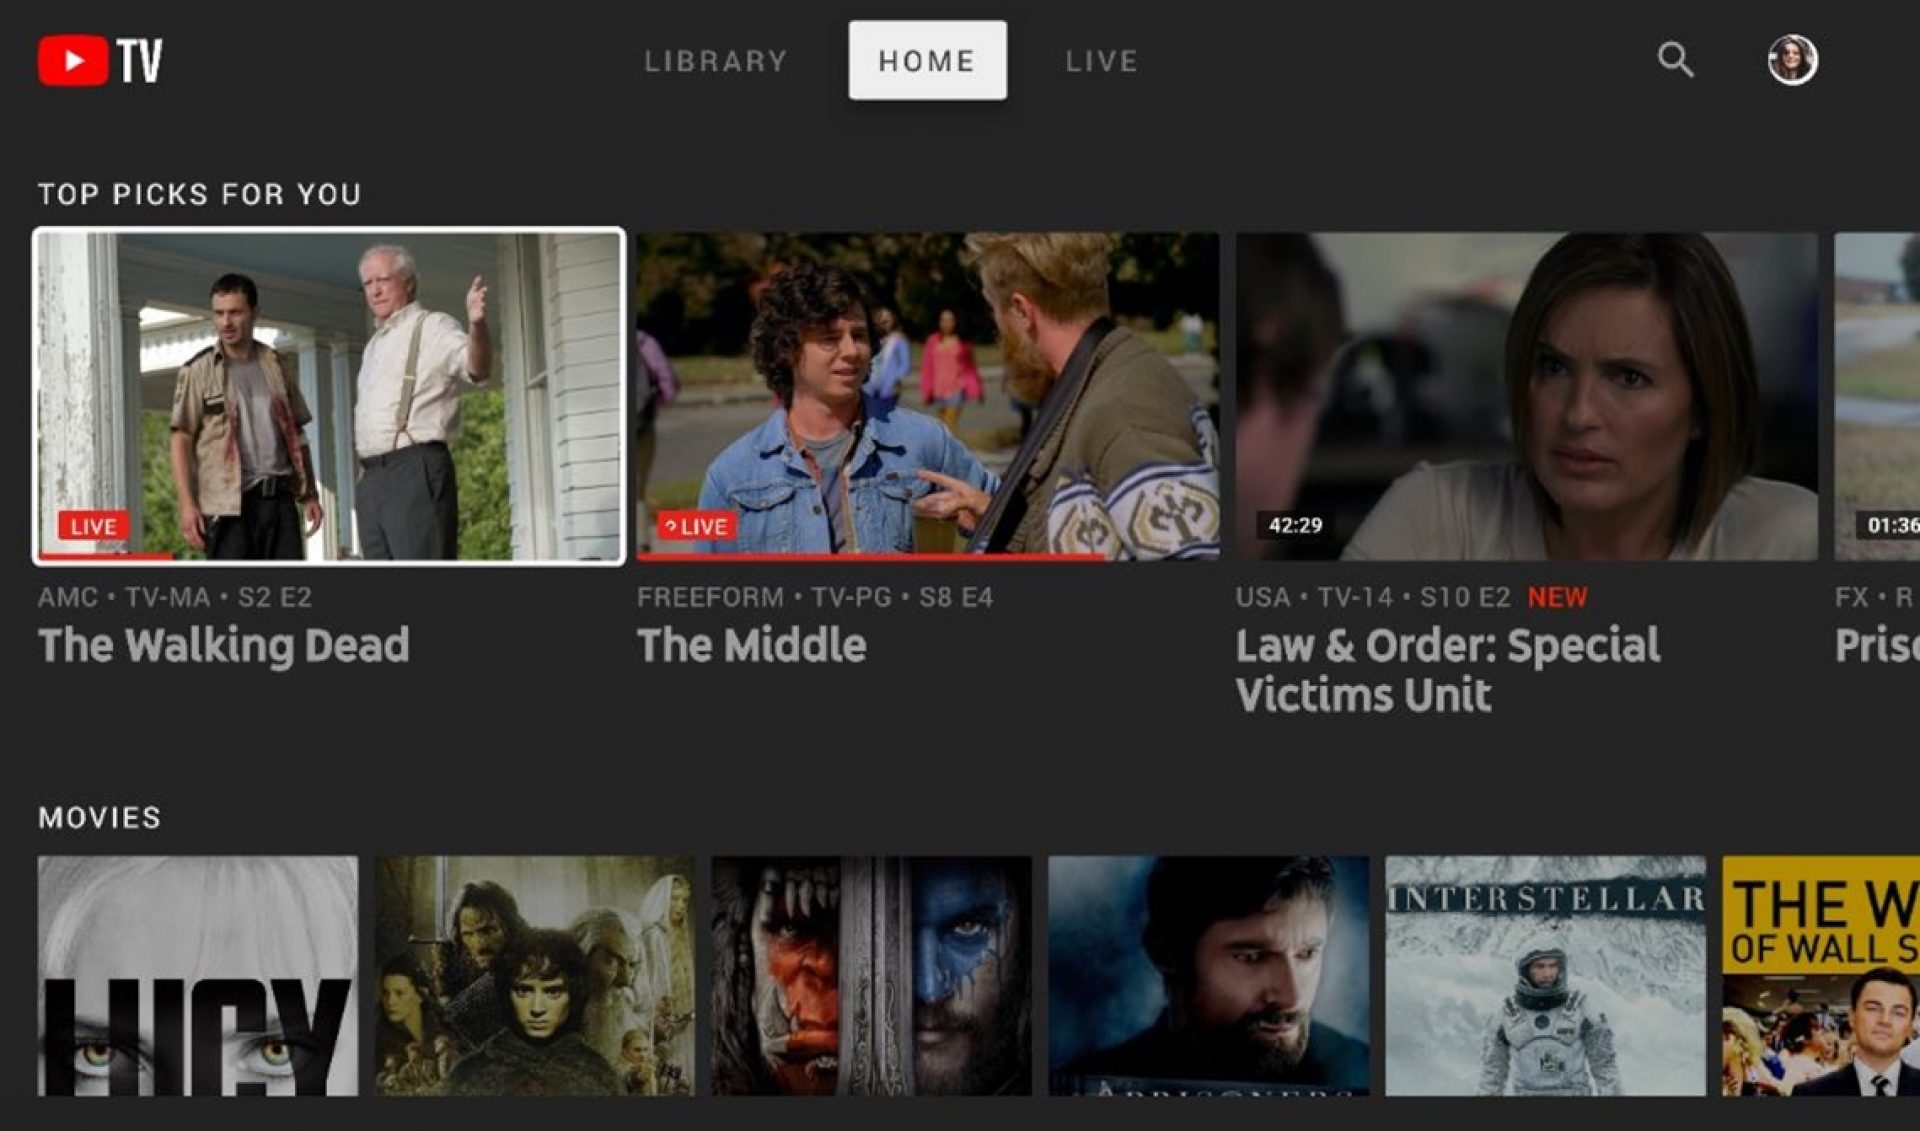 YouTube TV Adds Ability To Fast-Forward Through Ads On DVRd Shows